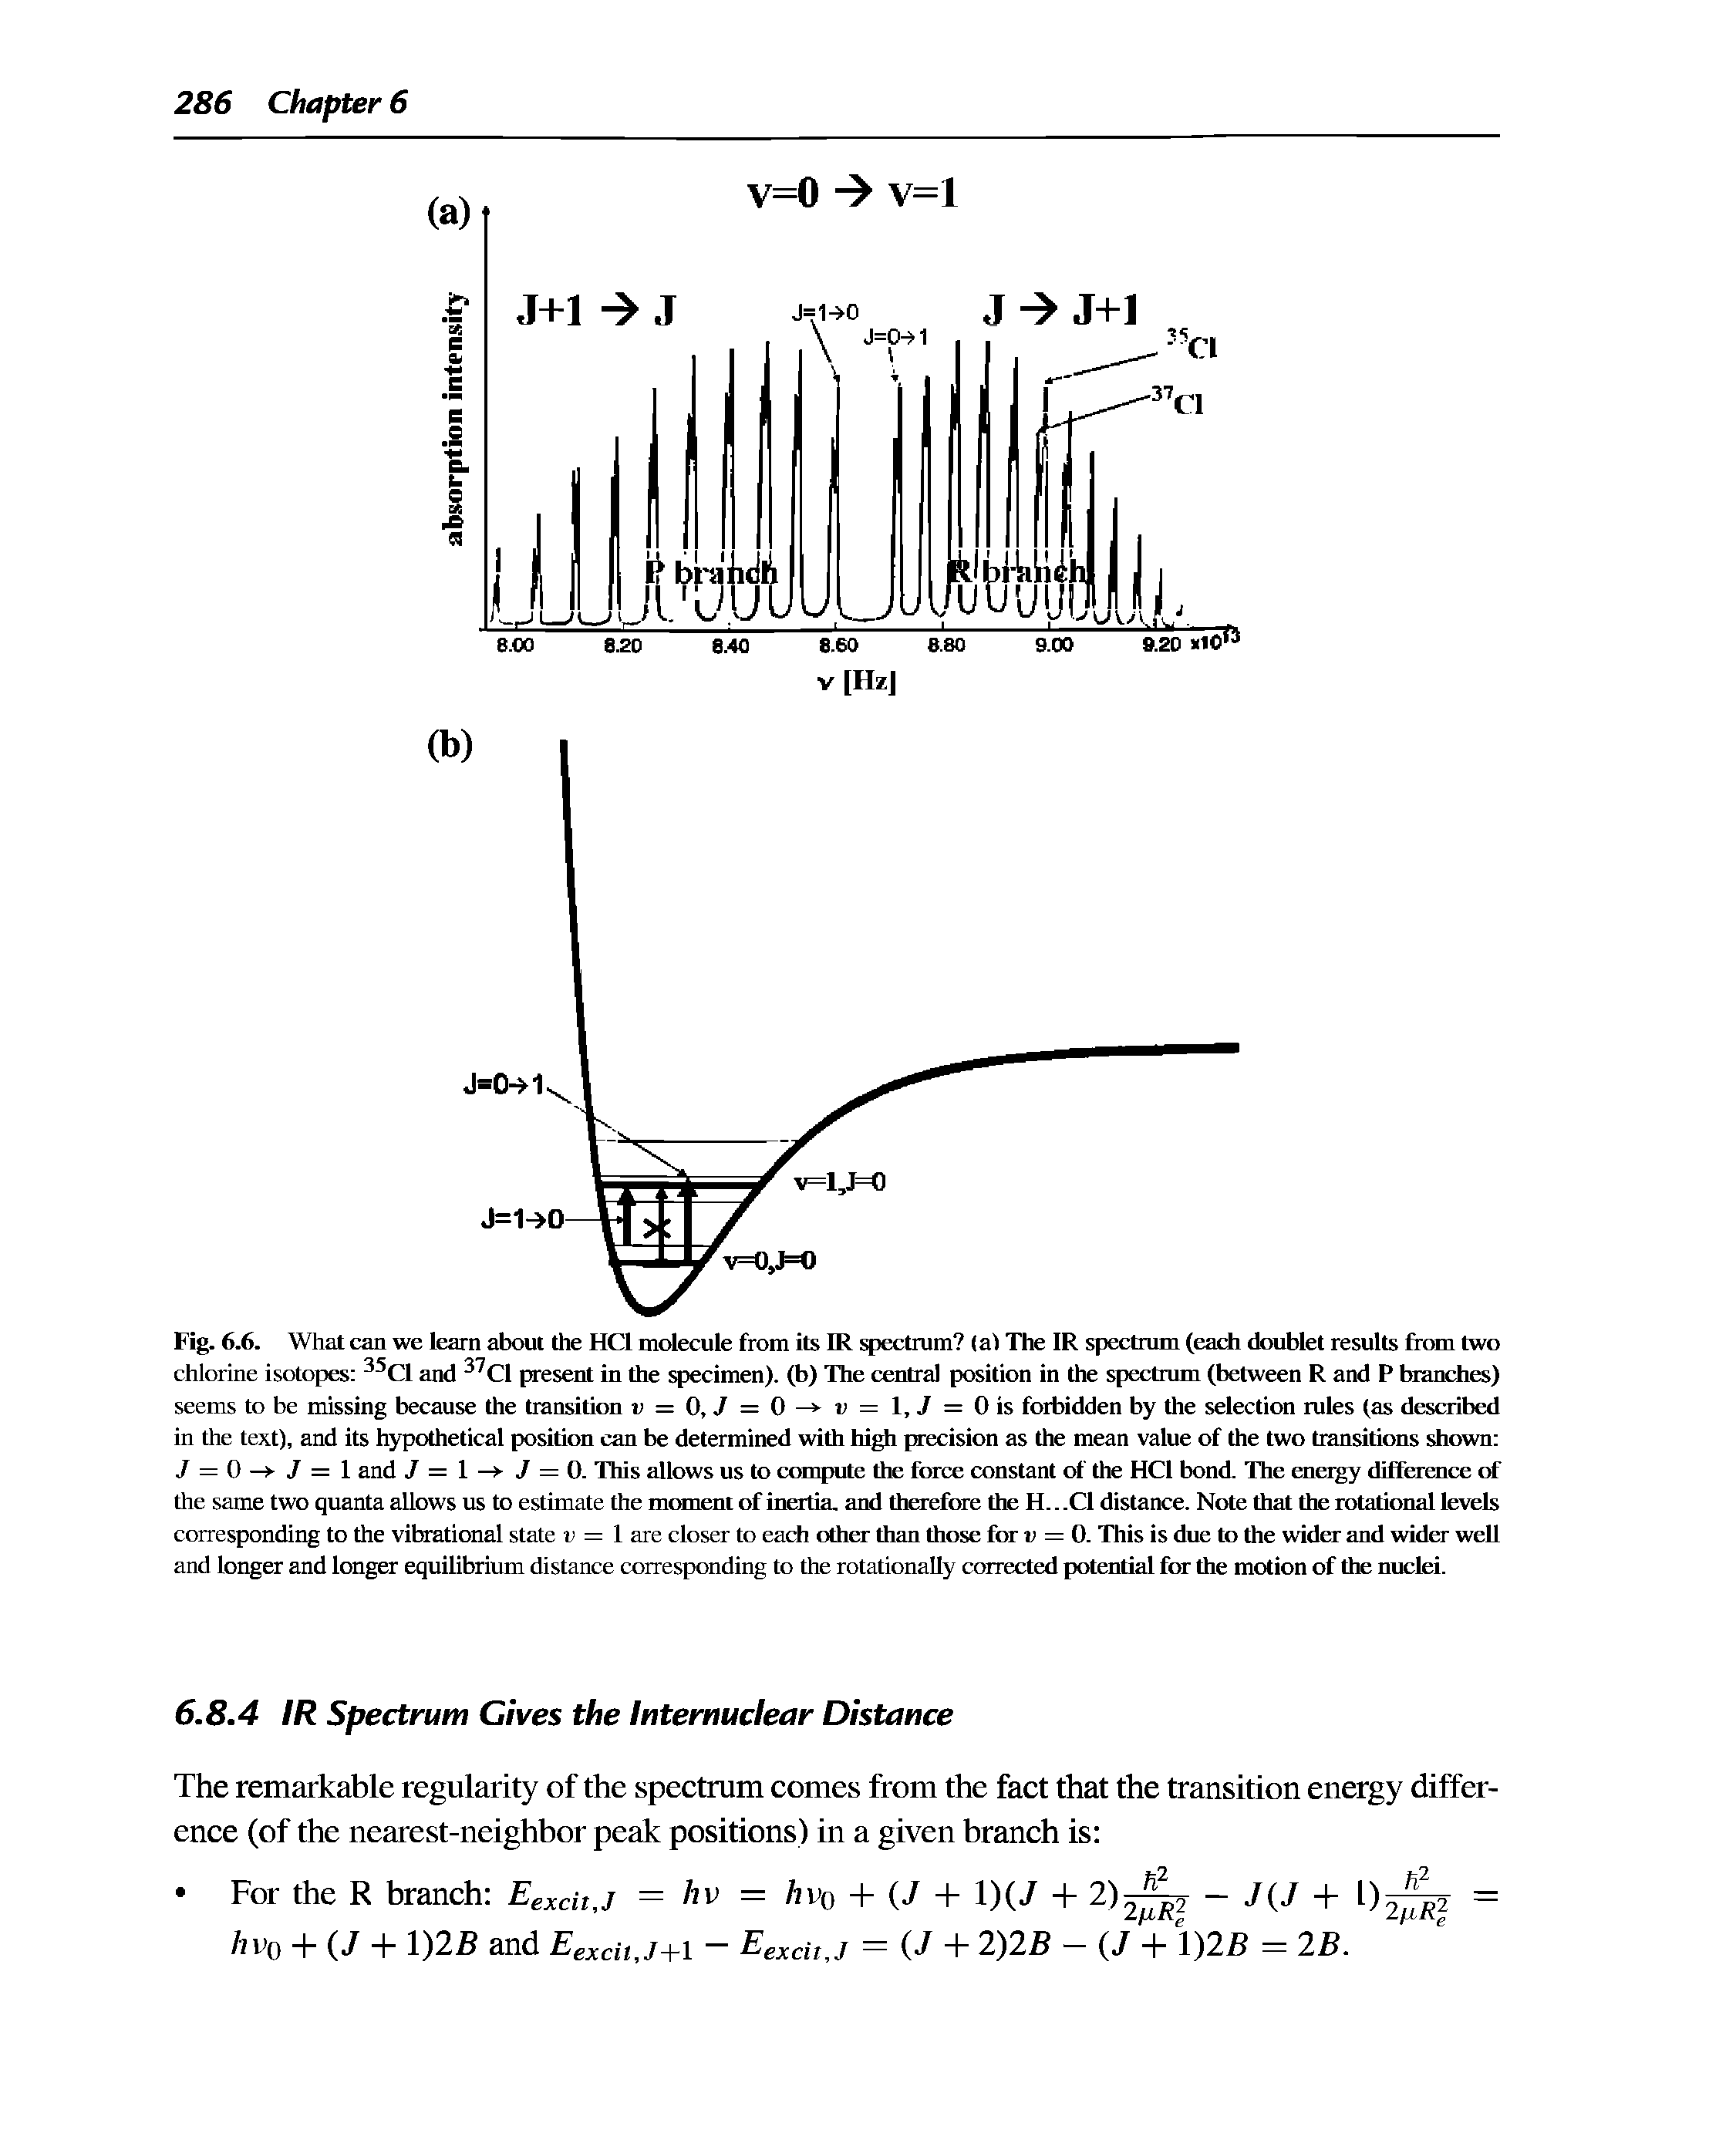 Fig. 6.6. What can we learn about the HCl molecule from its IR spectrum (al The IR spectrum (each doublet results from two chlorine isotopes Cl and Cl present in the specimen), (b) The central position in the spectrum (between R and P brandies) seems to be missing because the transition u = 0, 7 = 0- u = l, T = Ois forbidden by the selection rules (as described in the text), and its hypothetical position can be determined with high precision as the mean value of the two transitions shown J = 0 - J = I and / = 1 -> 7 = 0. This allows us to compute the force constant of the HCl bond. The energy difference rf the same two quanta allows us to estimate the moment of inertia, and therefore the H... Cl distance. Note that the rotational levels corresponding to the vibrational state r = 1 are closer to each other than those for v = 0. This is due to the wider and wider well and longer and longer equilibrium distance corresponding to the rotationally corrected potential for the motion of the nuclei.